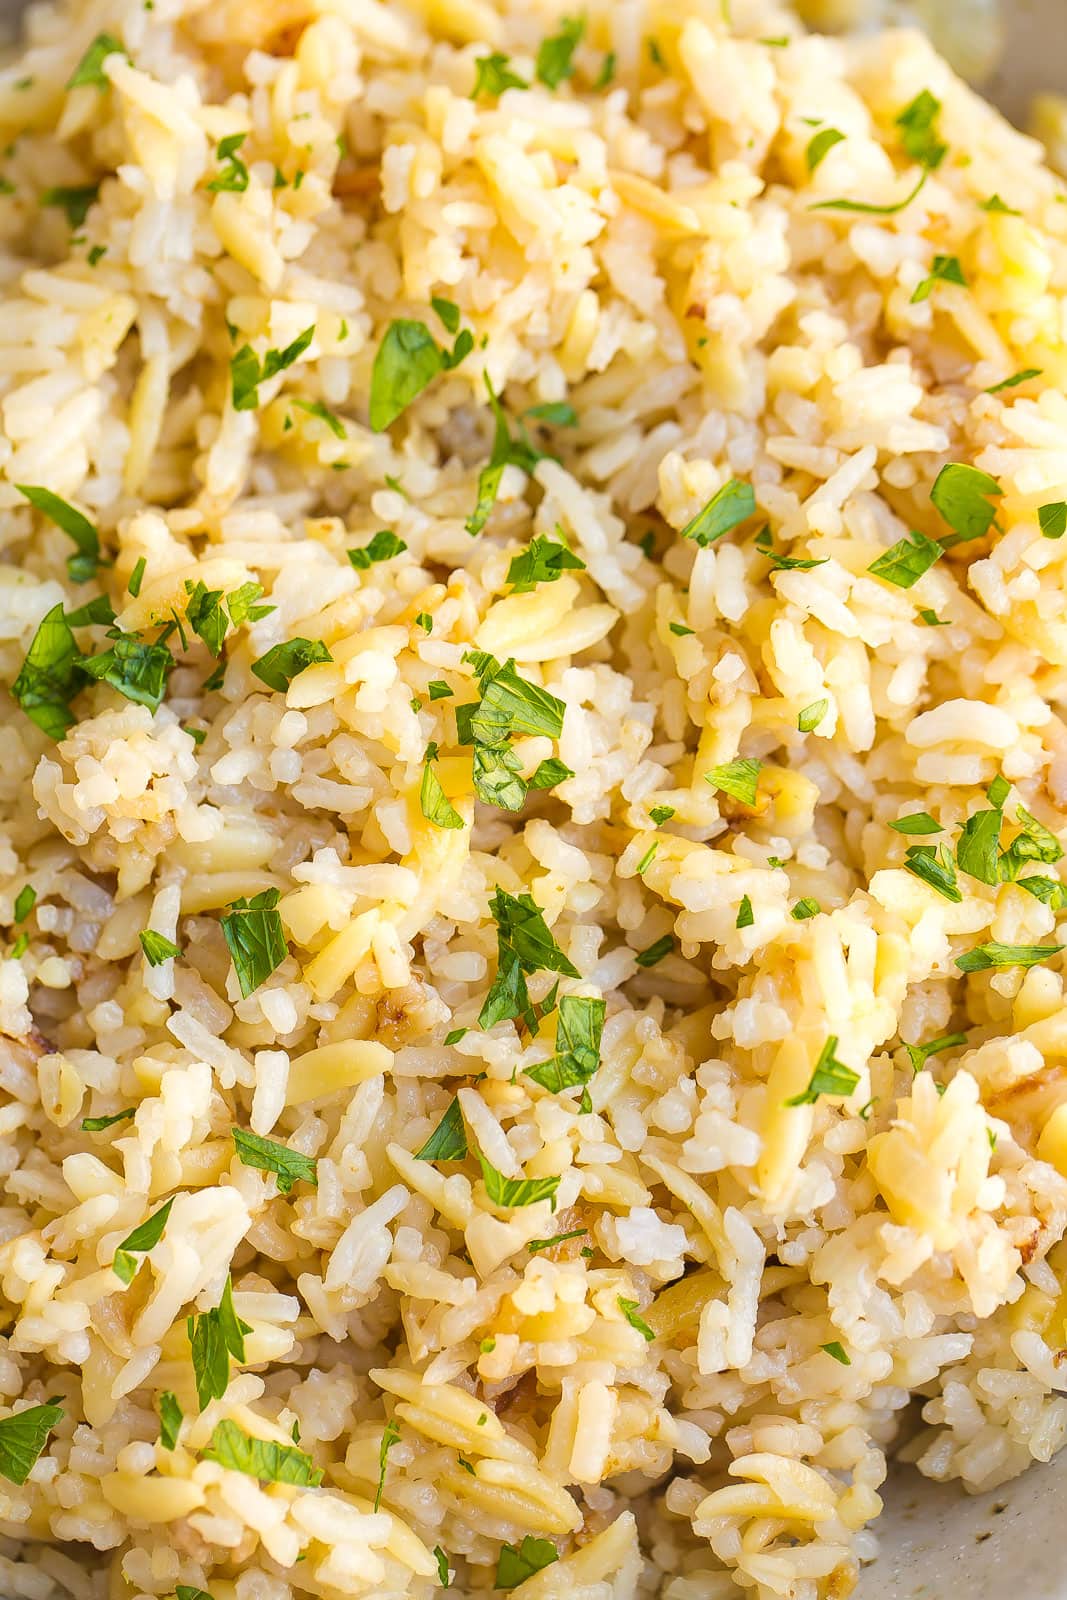 Closeup view of rice pilaf with chopped parsley on top.